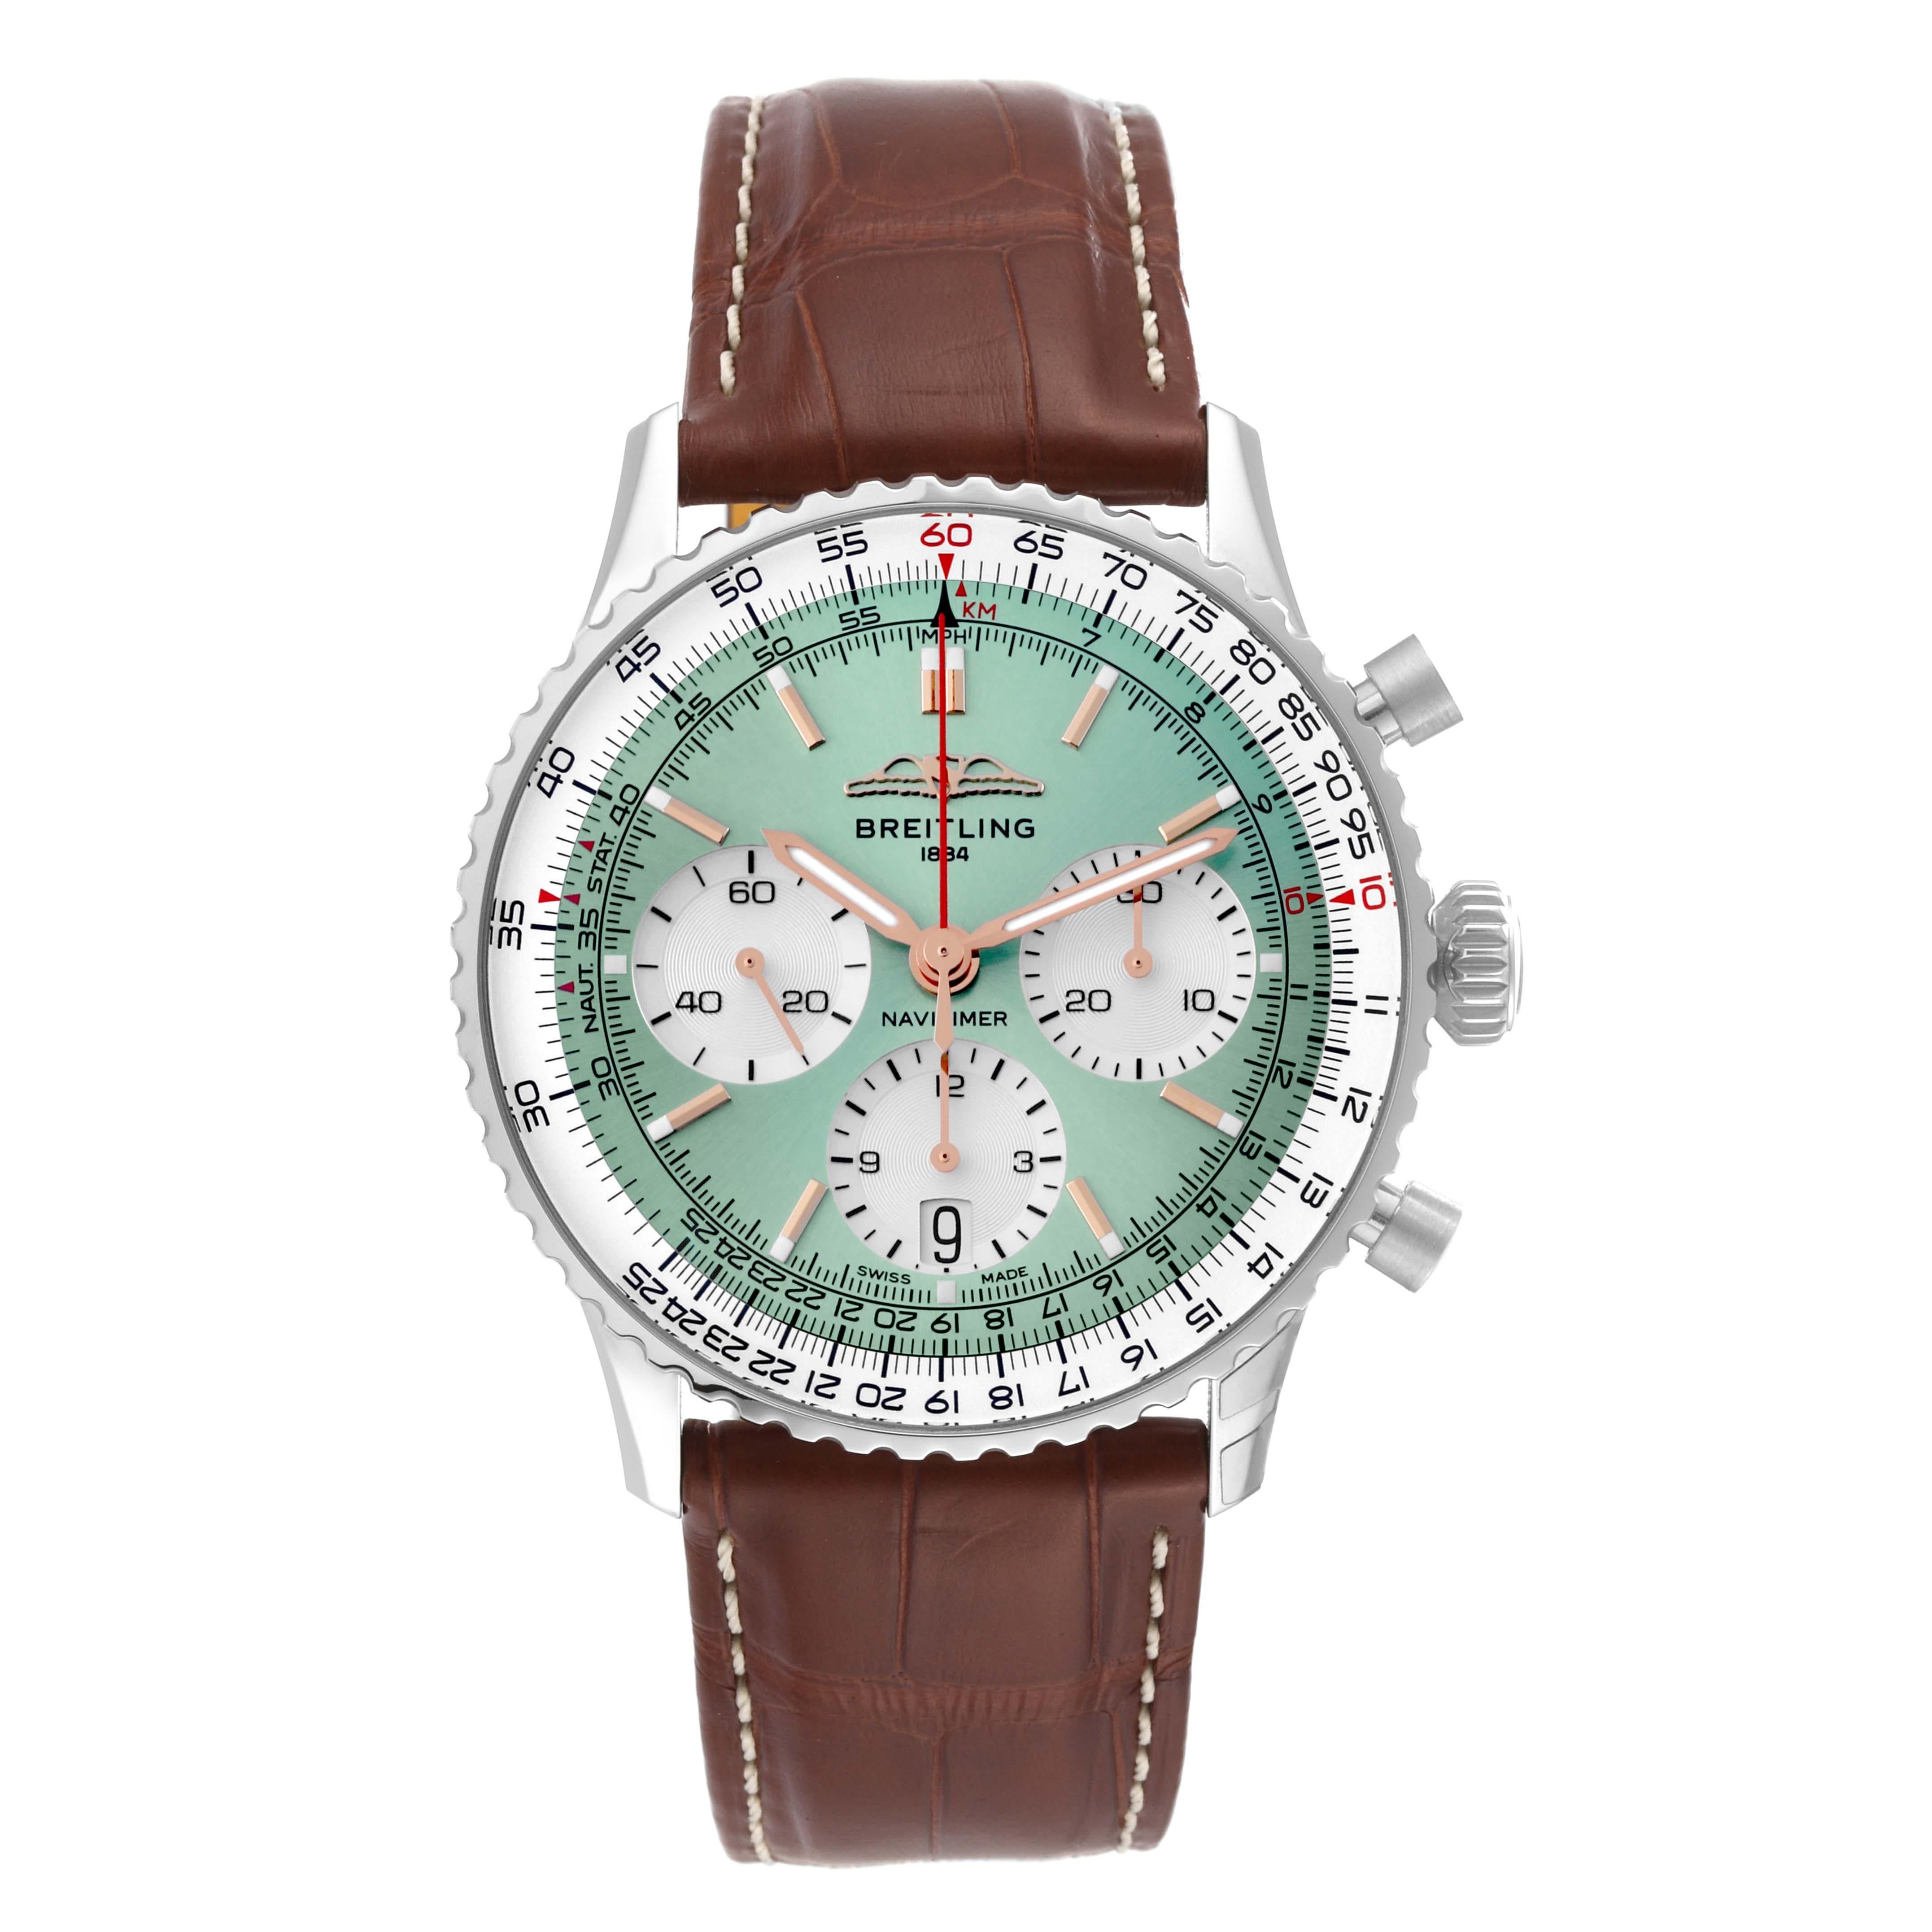 Breitling Navitimer B01 Chronograph 41 Green Dial Steel Mens Watch AB0139. Self-winding automatic officially certified chronometer movement. Chronograph function. Stainless steel case 41 mm in diameter. Case thickness 13.6 mm. Transparent exhibition